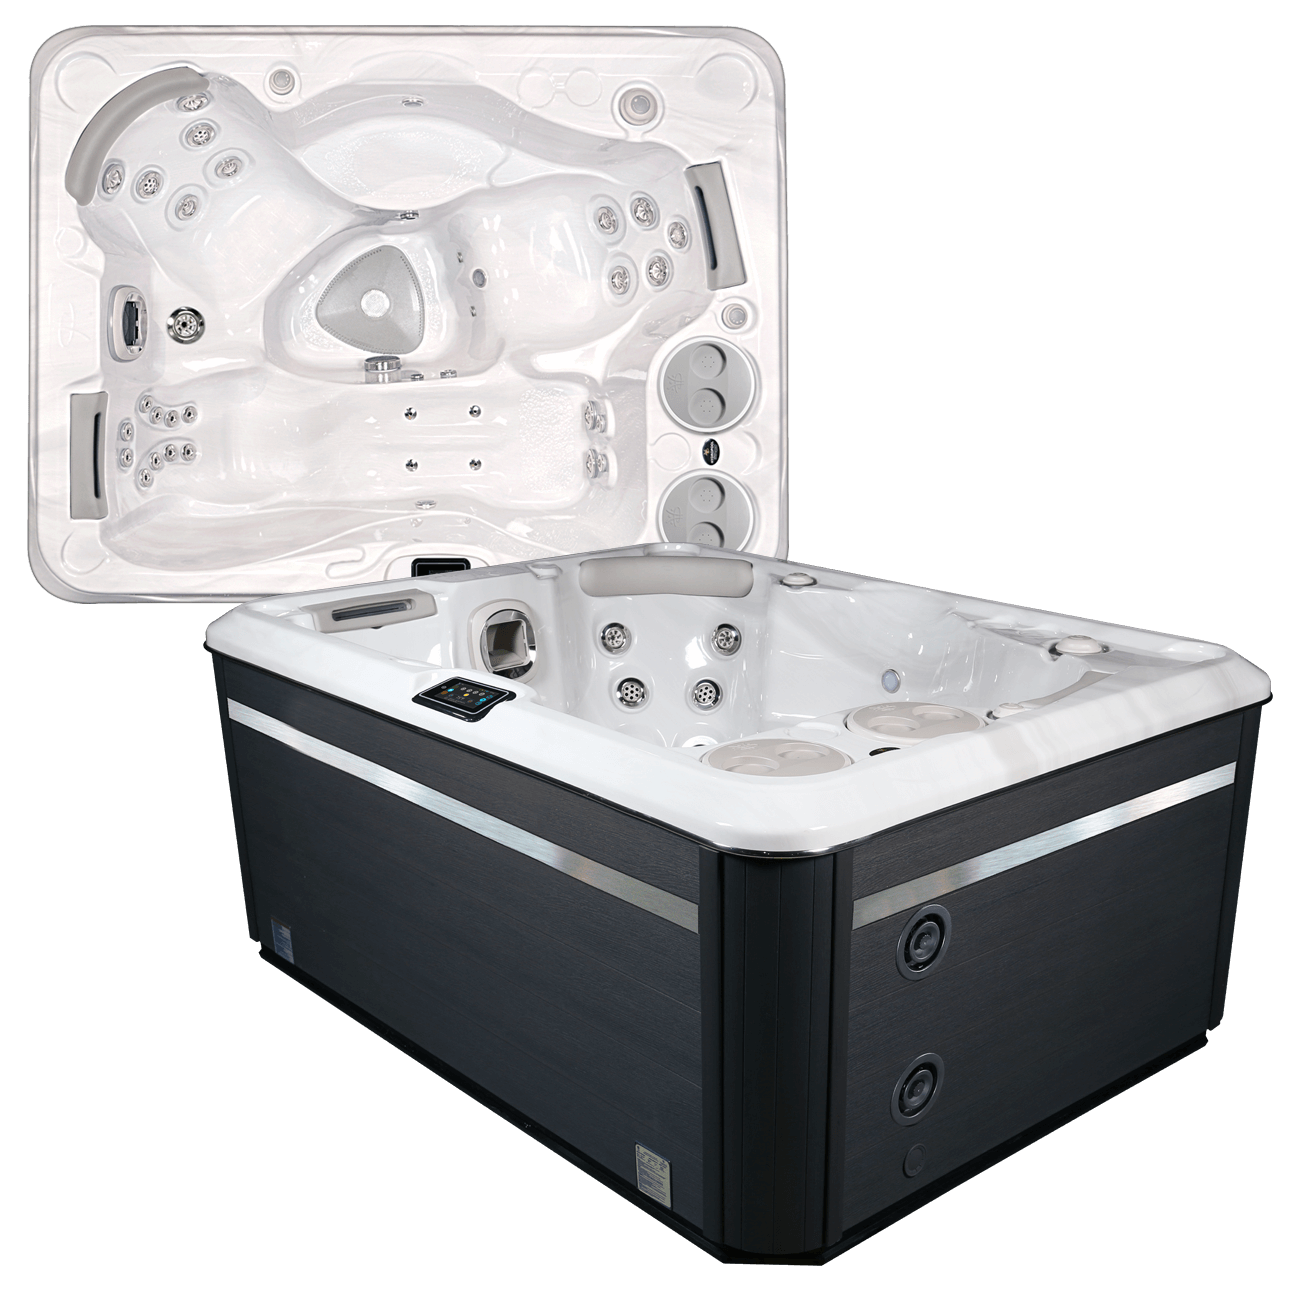 Hydropool Self-Cleaning 395 Gold hot tub product